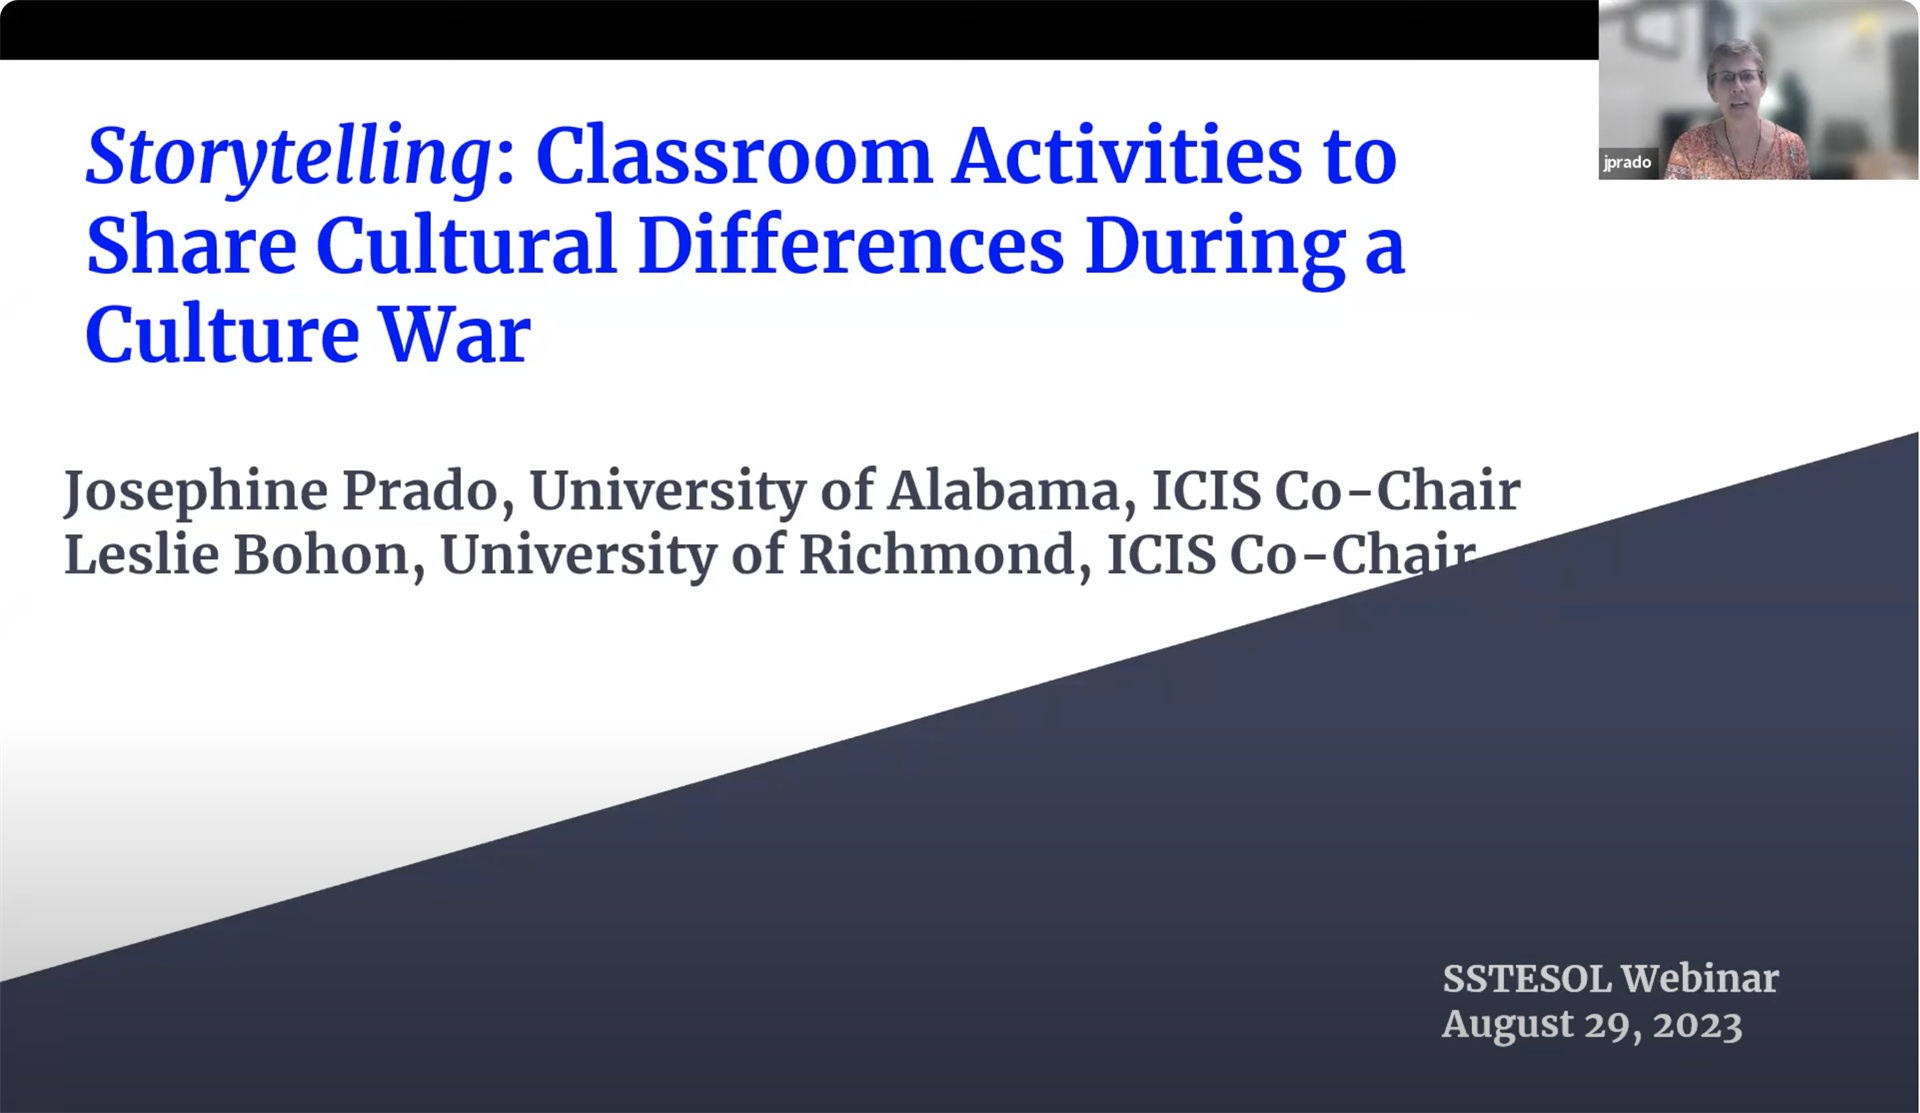 YouTube thumbnail for the SSTESOL webinar titled Storytelling: Classroom Activities to Share Cultural Differences During a Culture War.